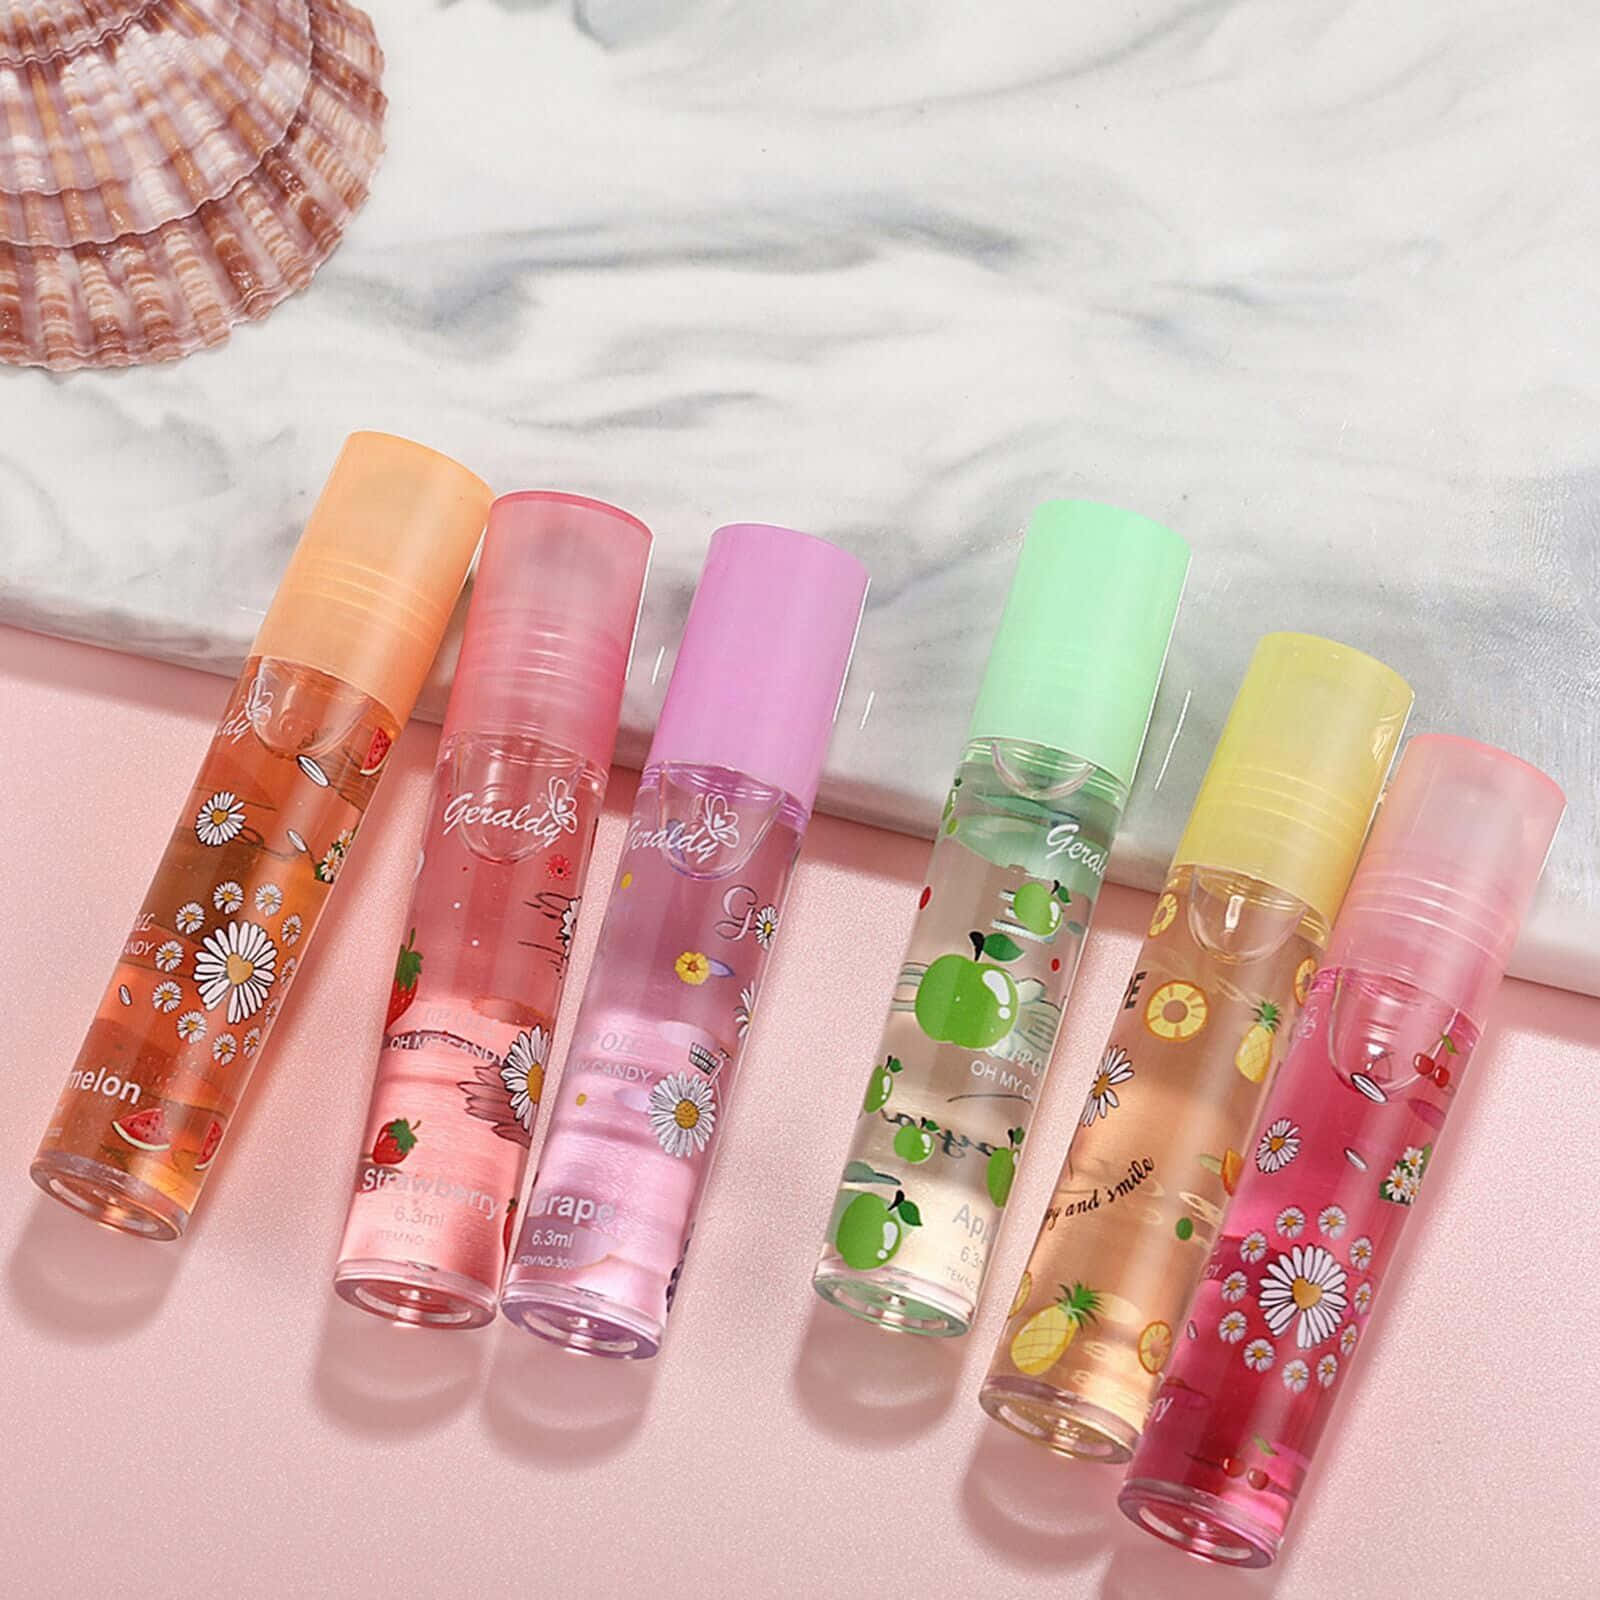 Five Different Colored Bottles Of Perfume With Shells On Them